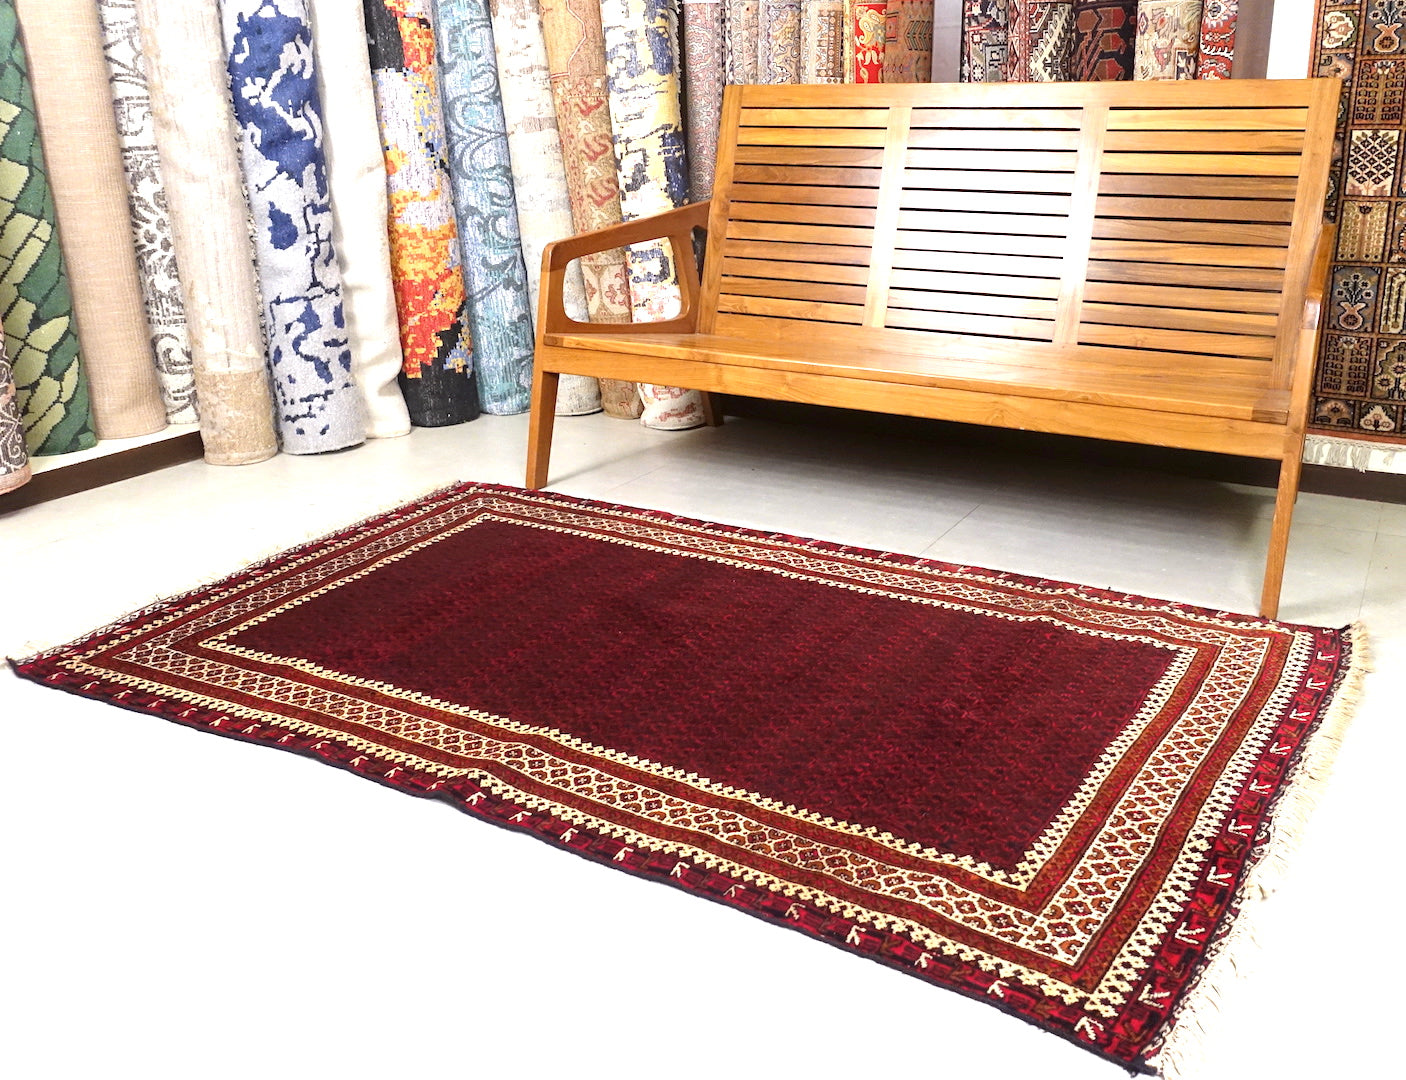 It is an Afghan wool rug that measures 3 feet 9 inches by 6 feet 4 inches. The colours used on the rug are red,beige and rust.